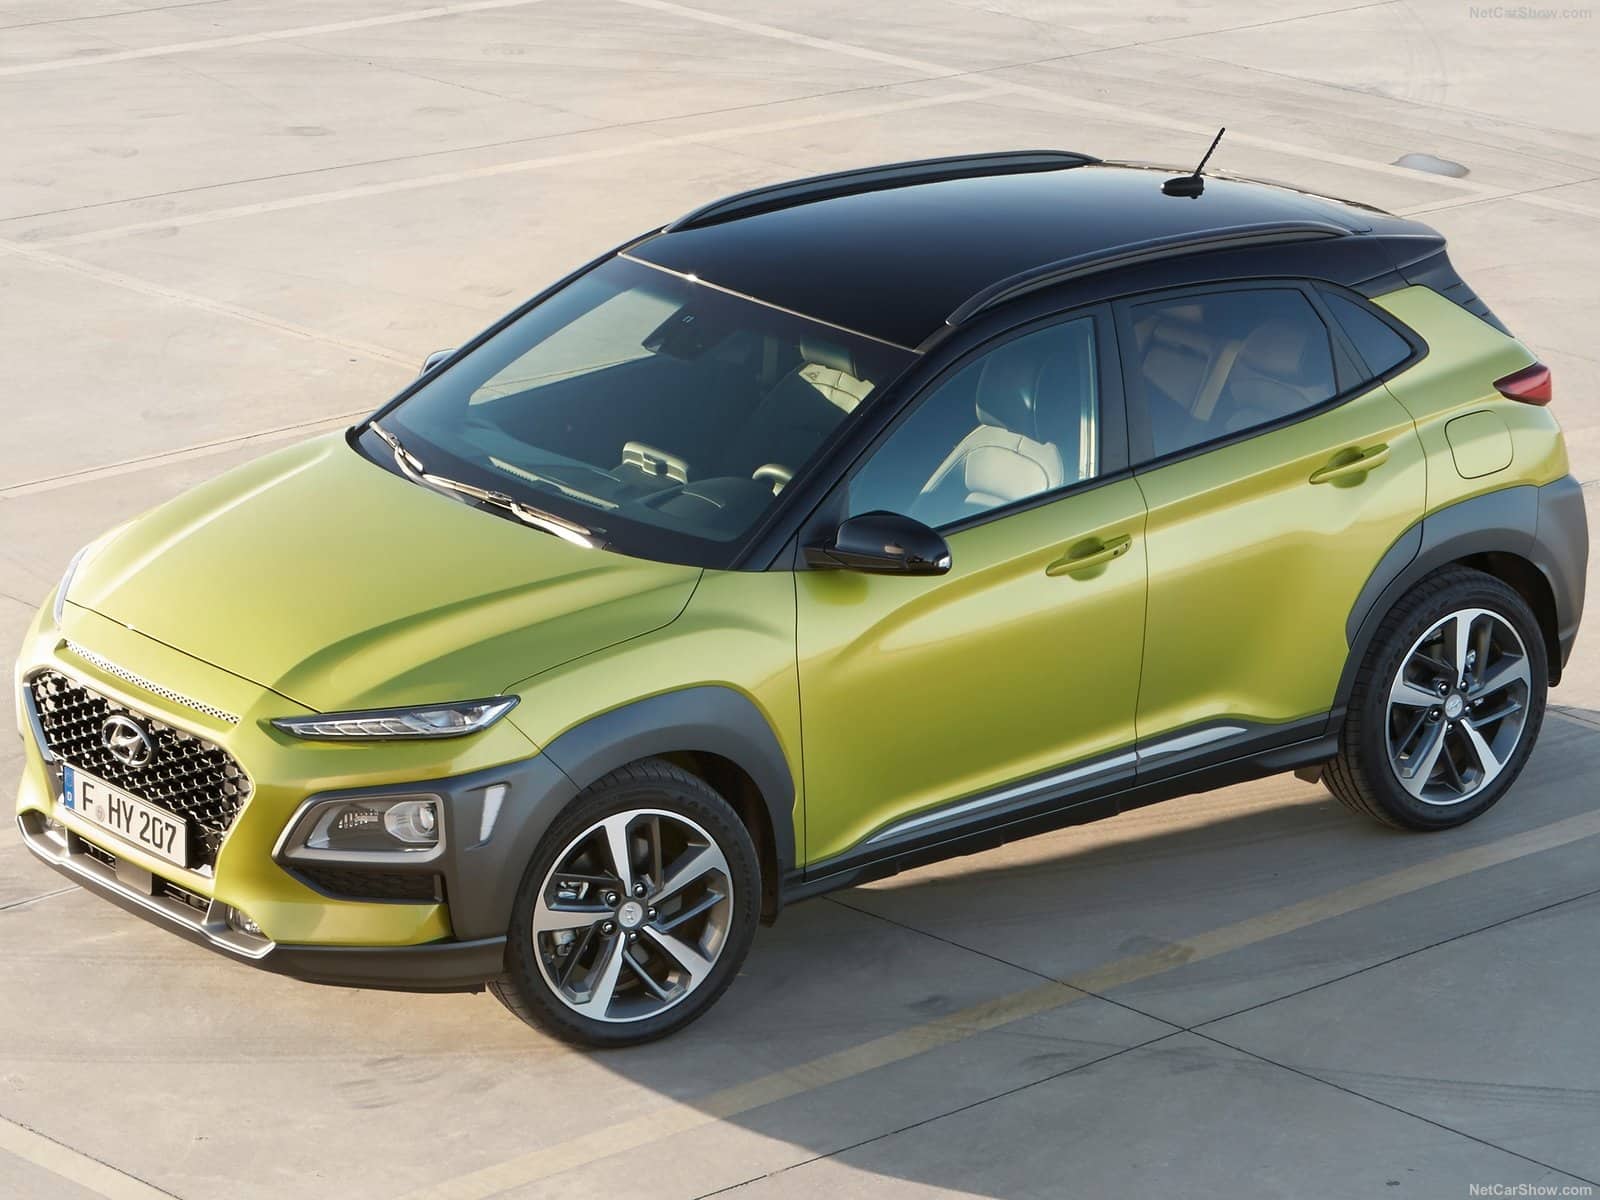 Hyundai Kona electric car will made in India for low coast